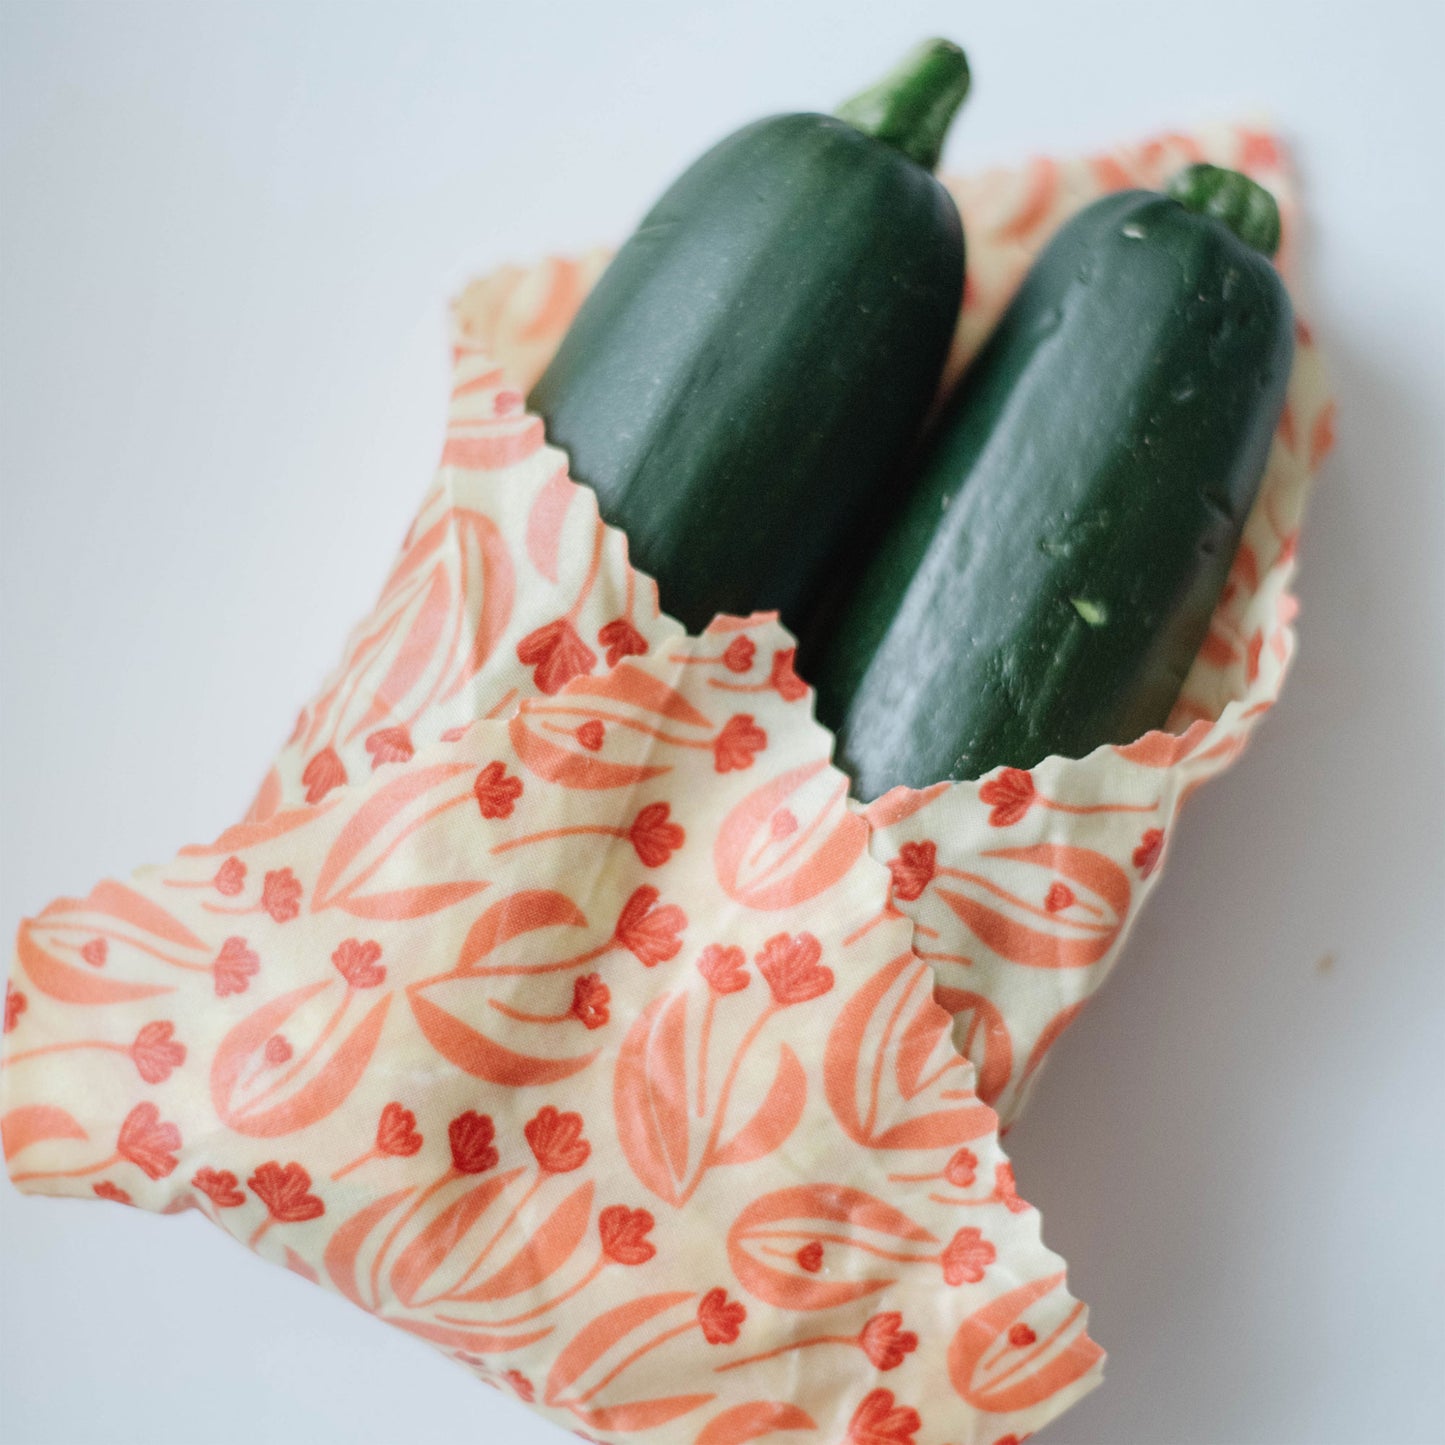 a medium wax food wrap hold two zucchini halves on a white background